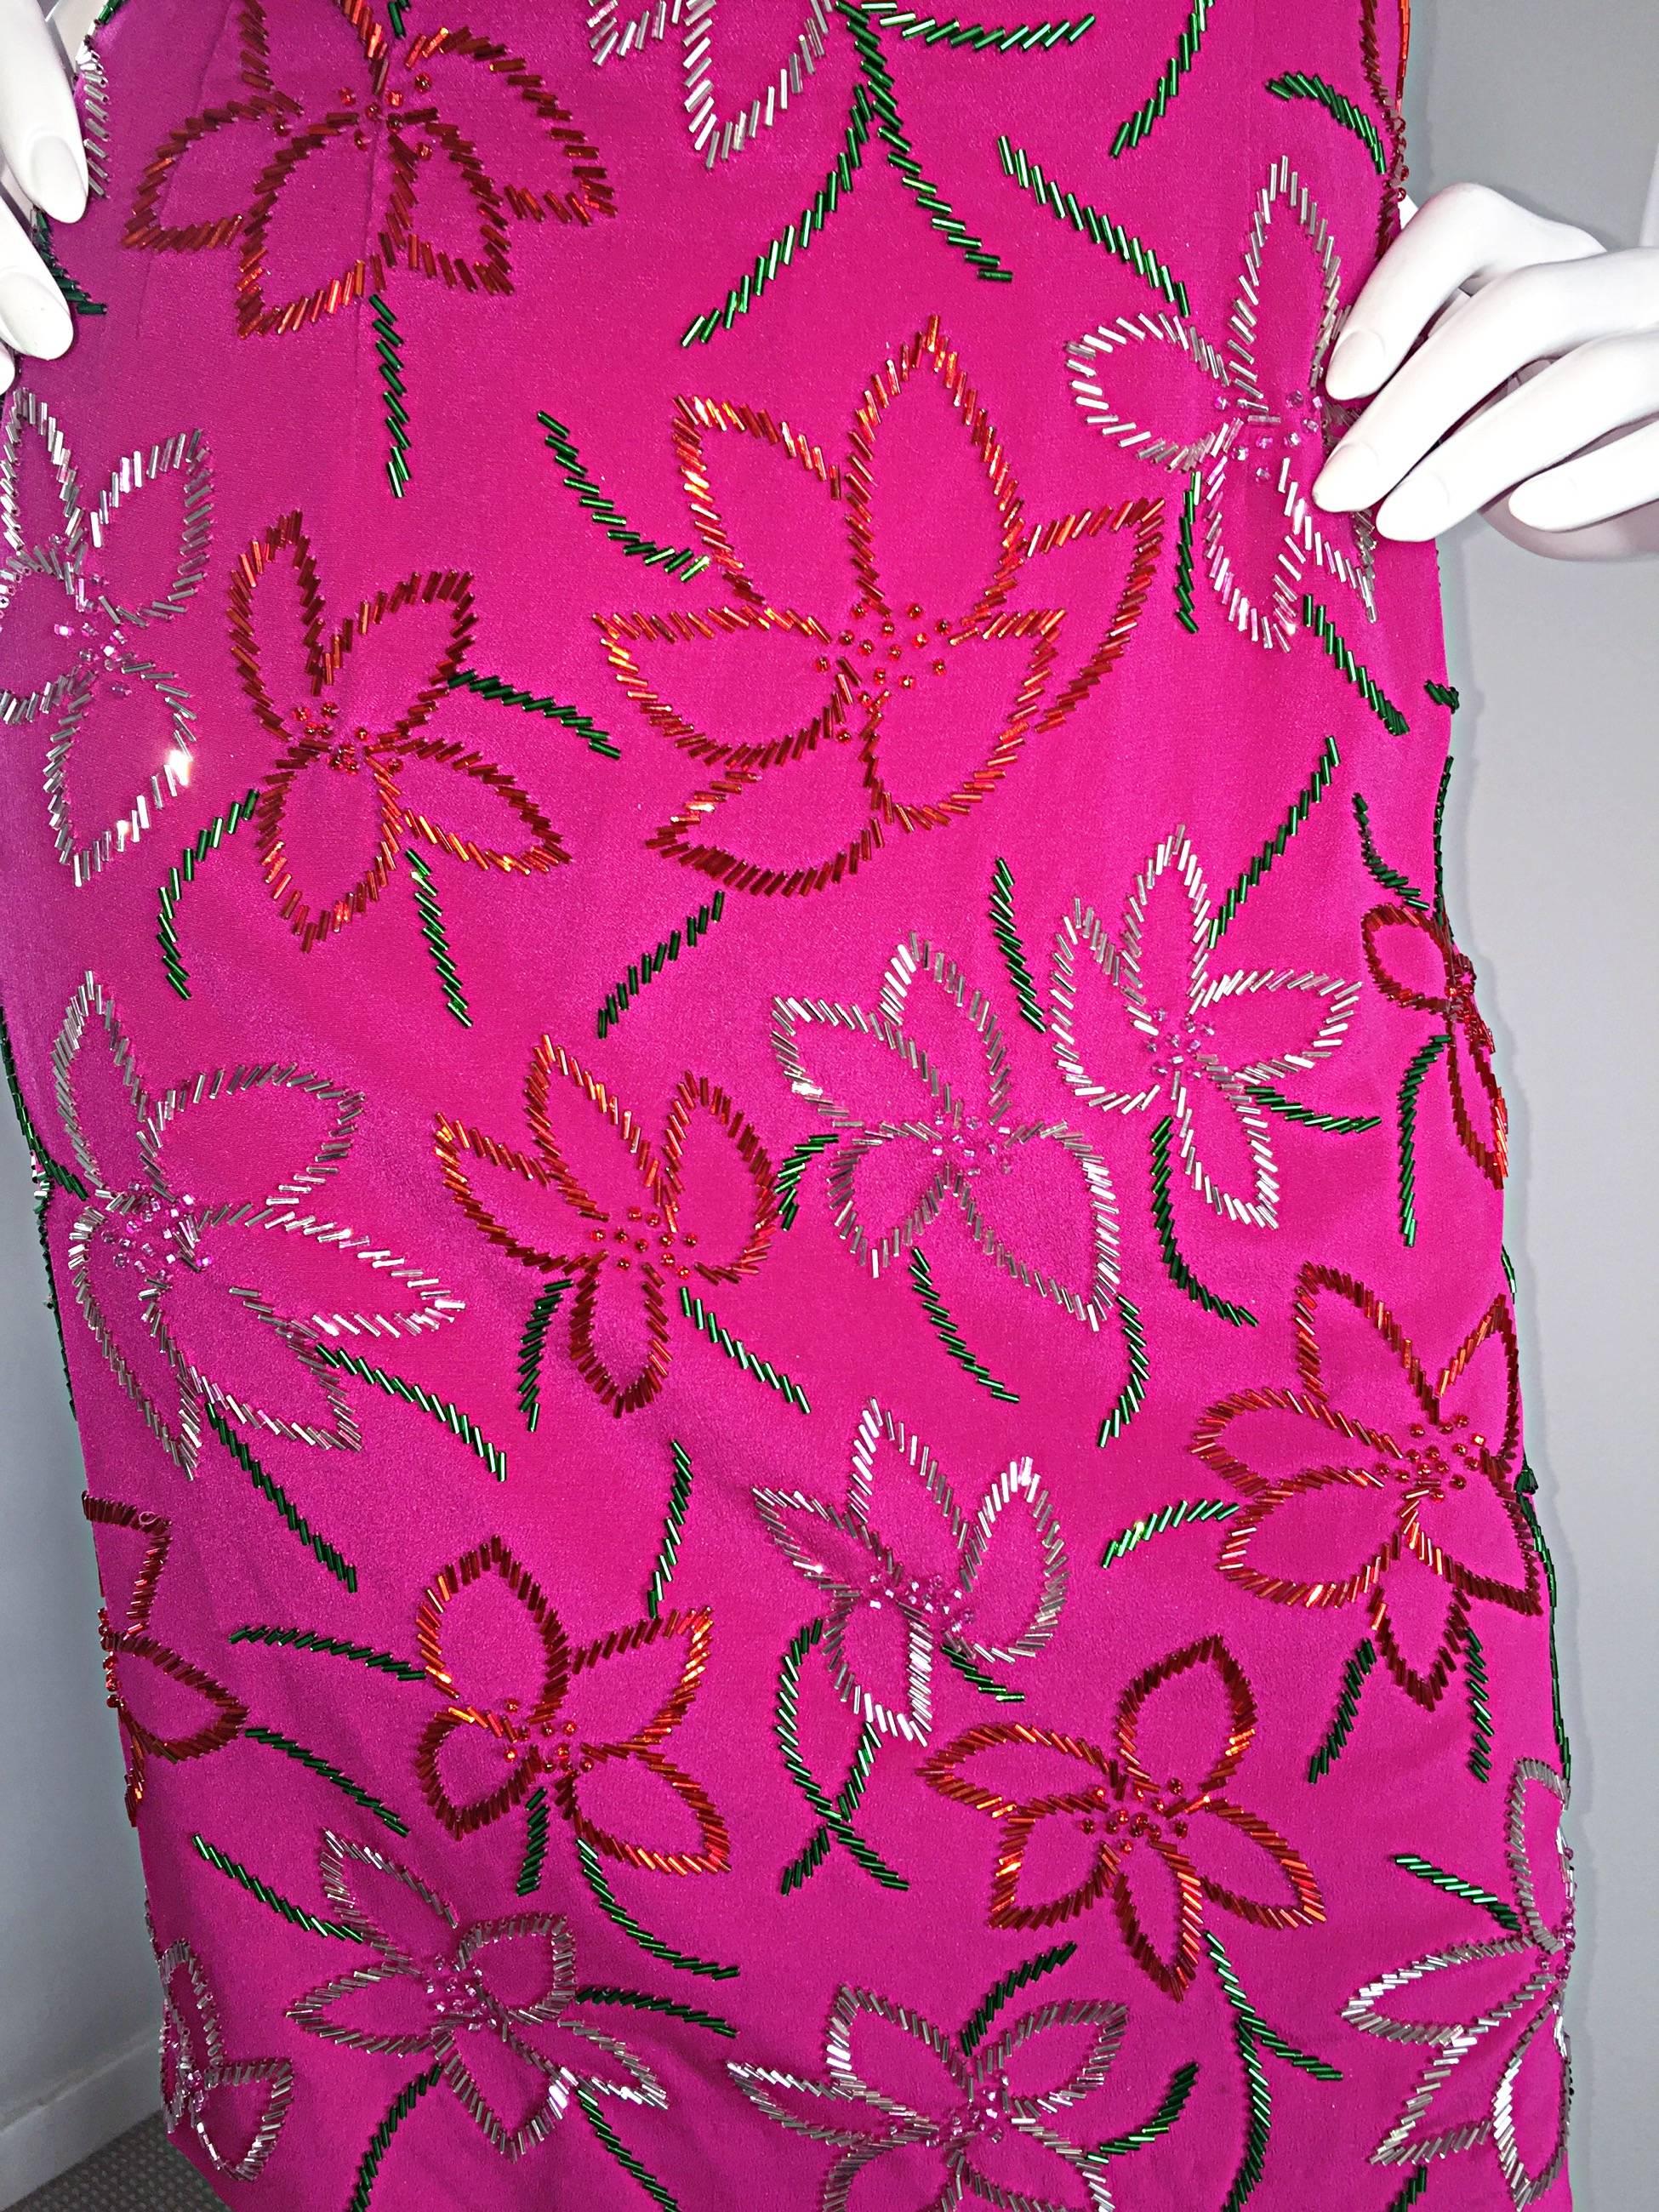 Wonderful Carmen Marc Valvo Early 90s Hot Pink Fuchsia Beaded Vintage Silk Dress In Excellent Condition For Sale In San Diego, CA